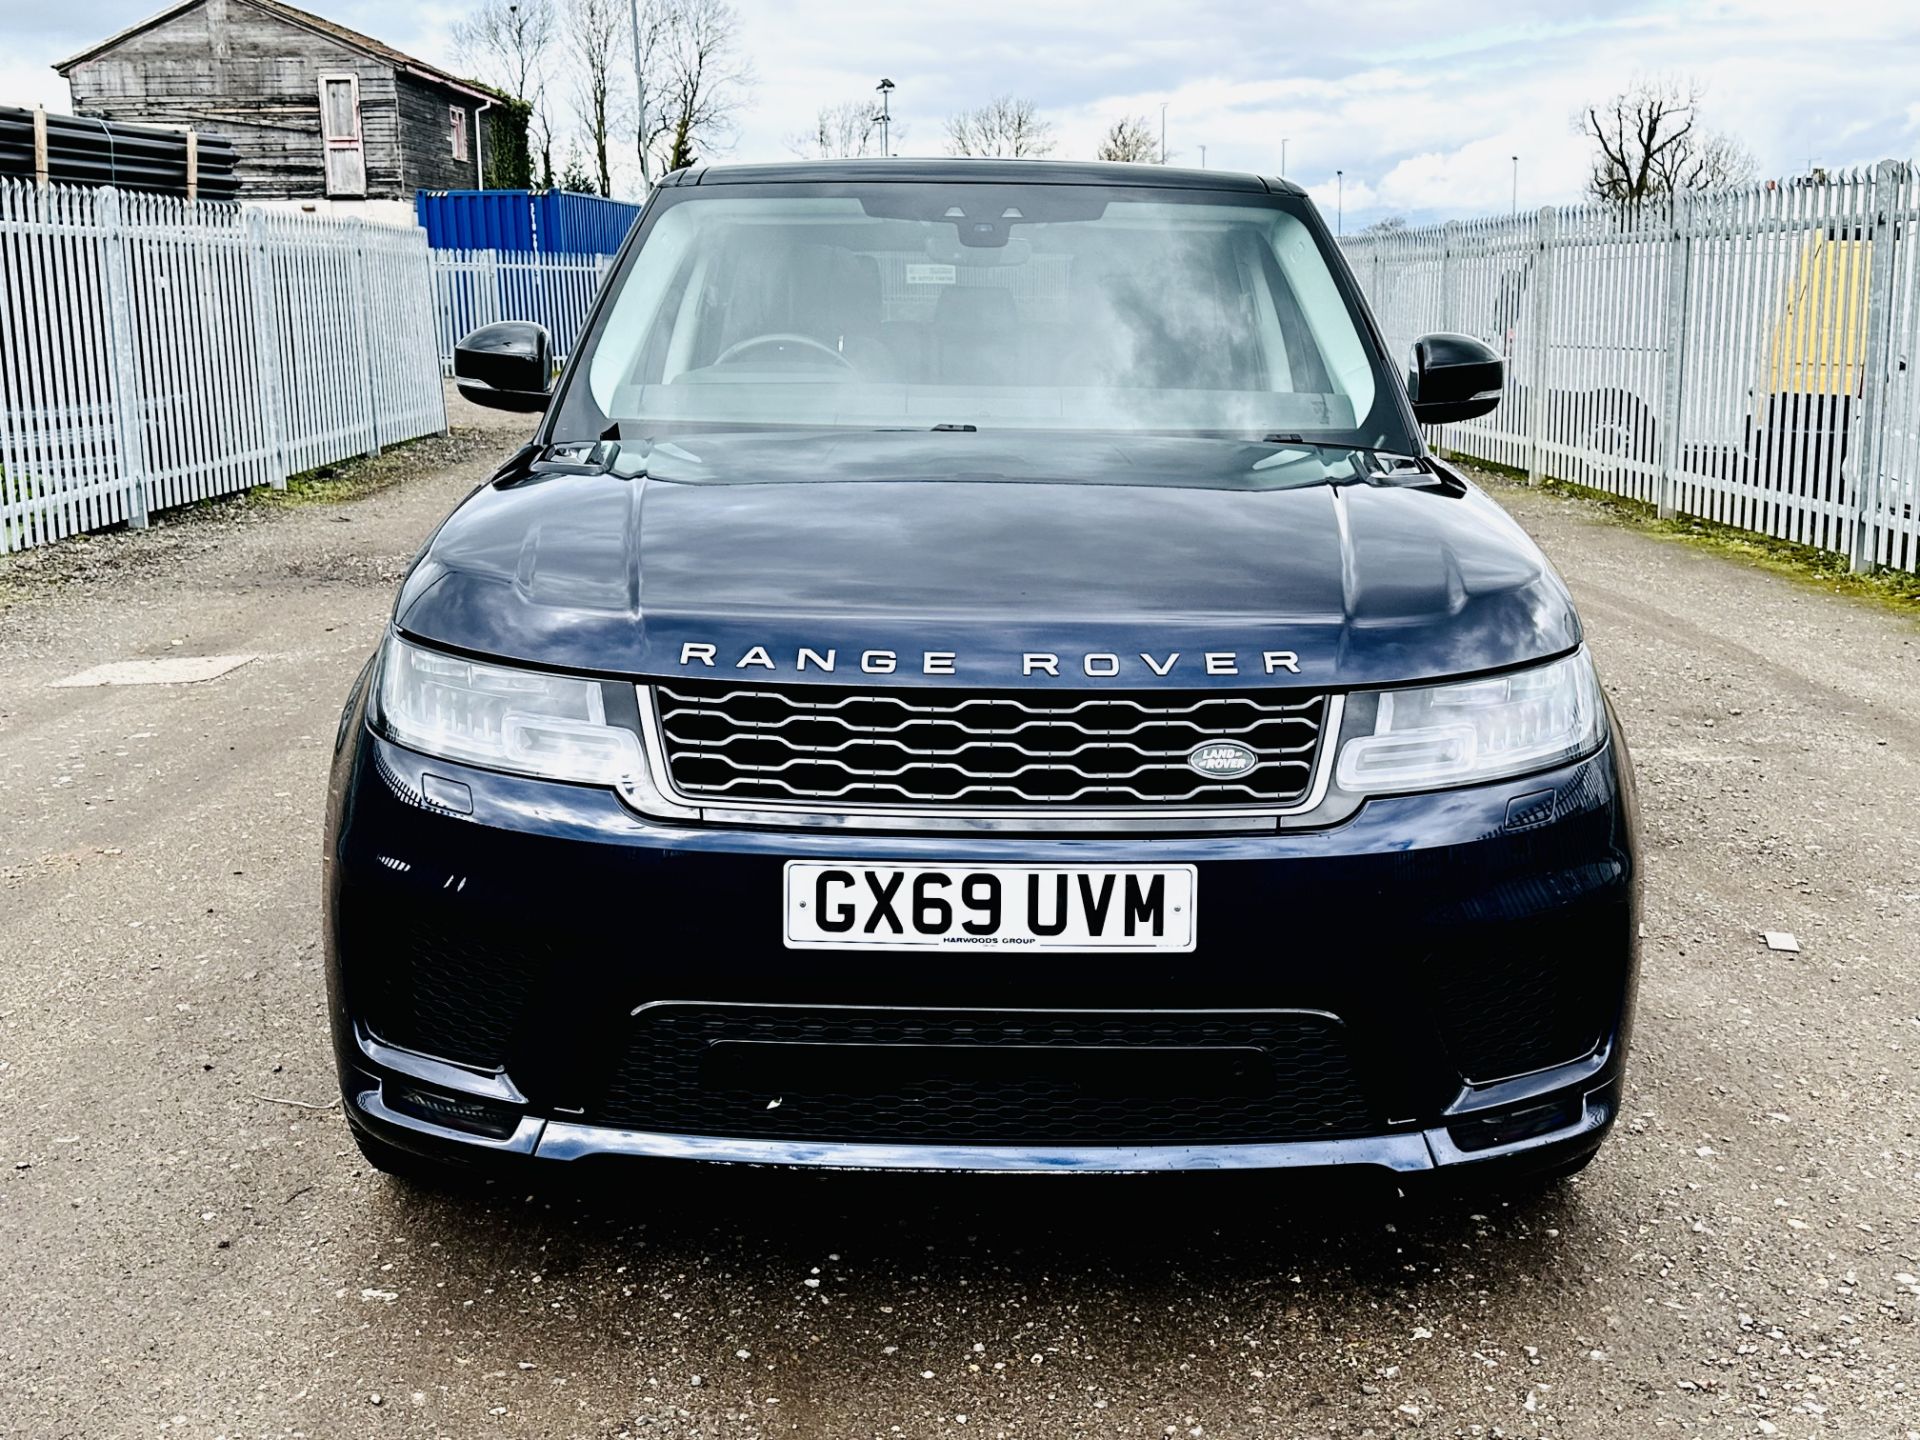 **ON SALE** Land Rover Range Rover Sport 3.0 SDV6 HSE DYNAMIC 2020 '69 Reg'- Only 47544 Miles - Image 5 of 30